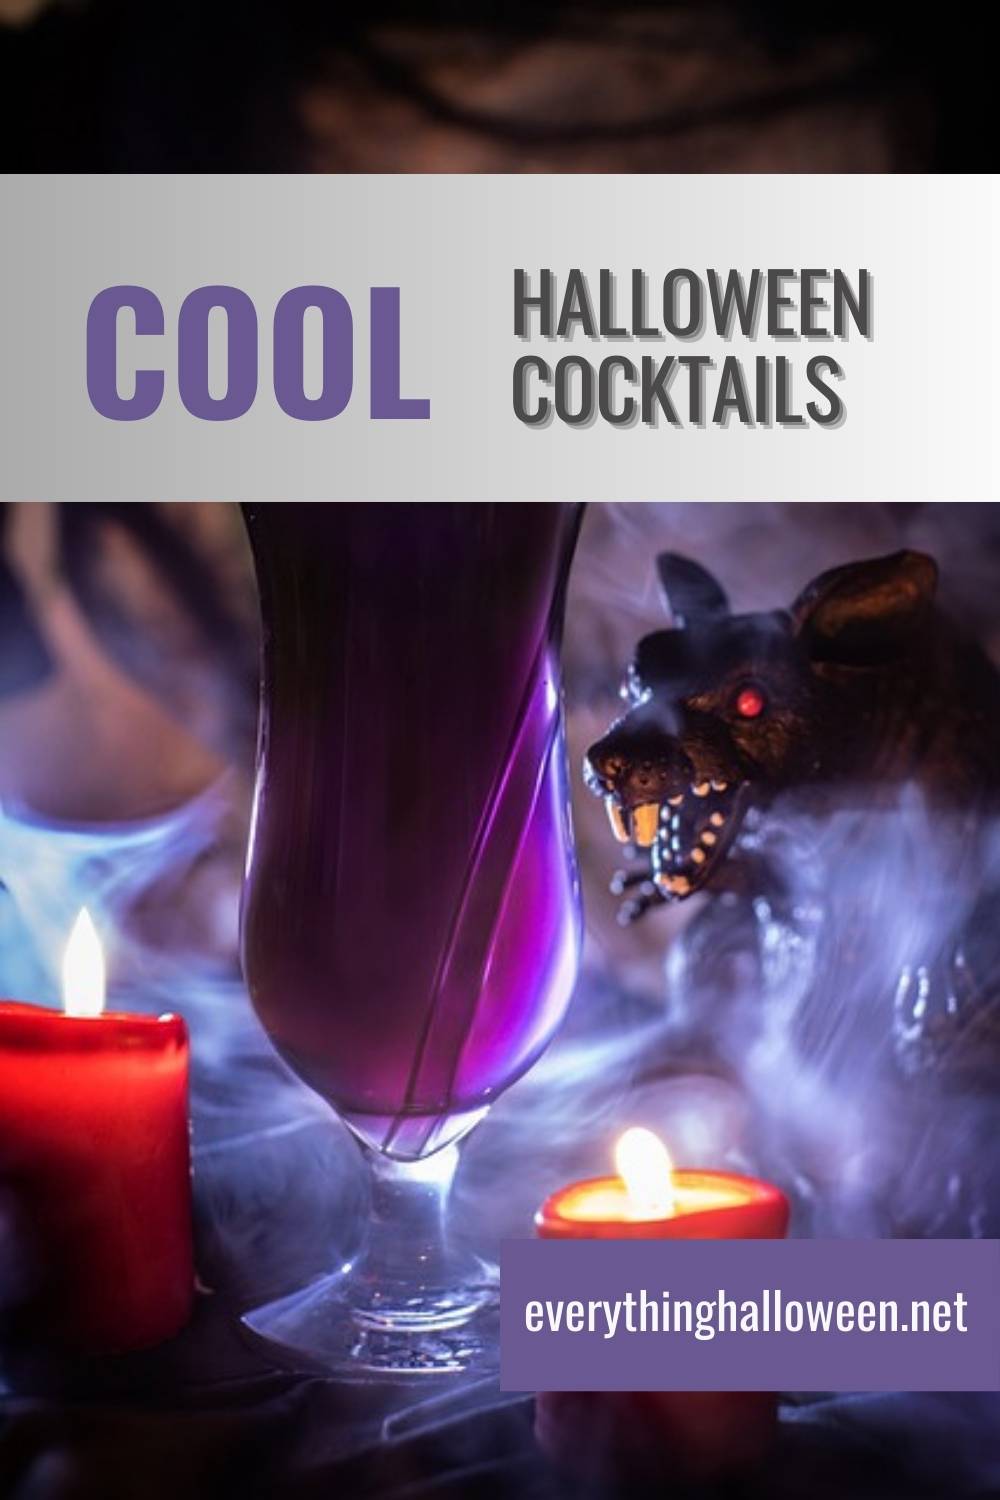 Ghoulishly Cool Halloween Cocktails